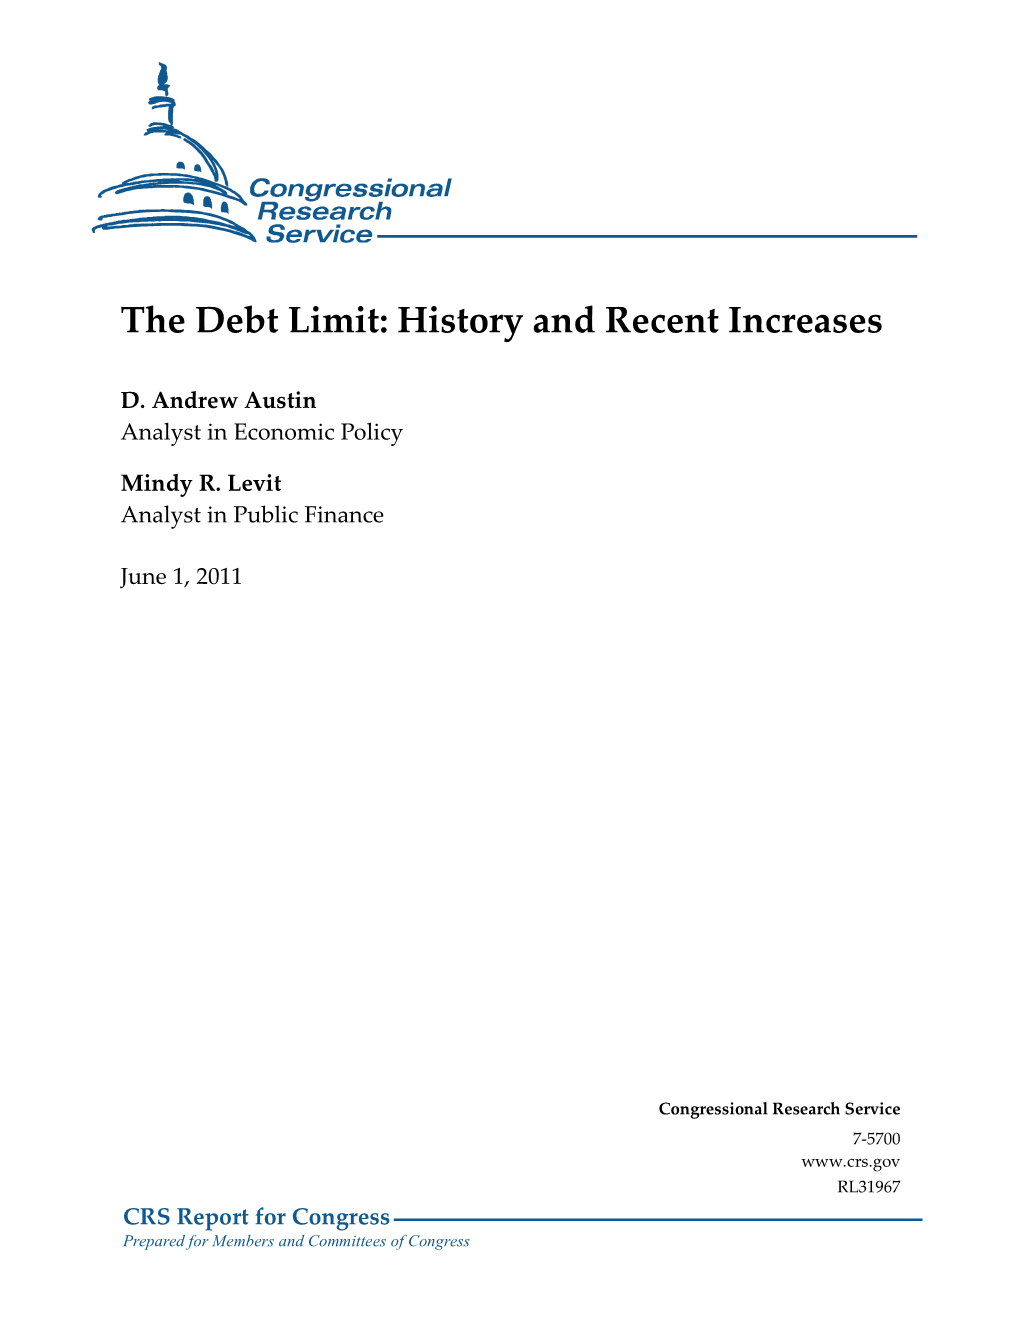 The Debt Limit: History and Recent Increases